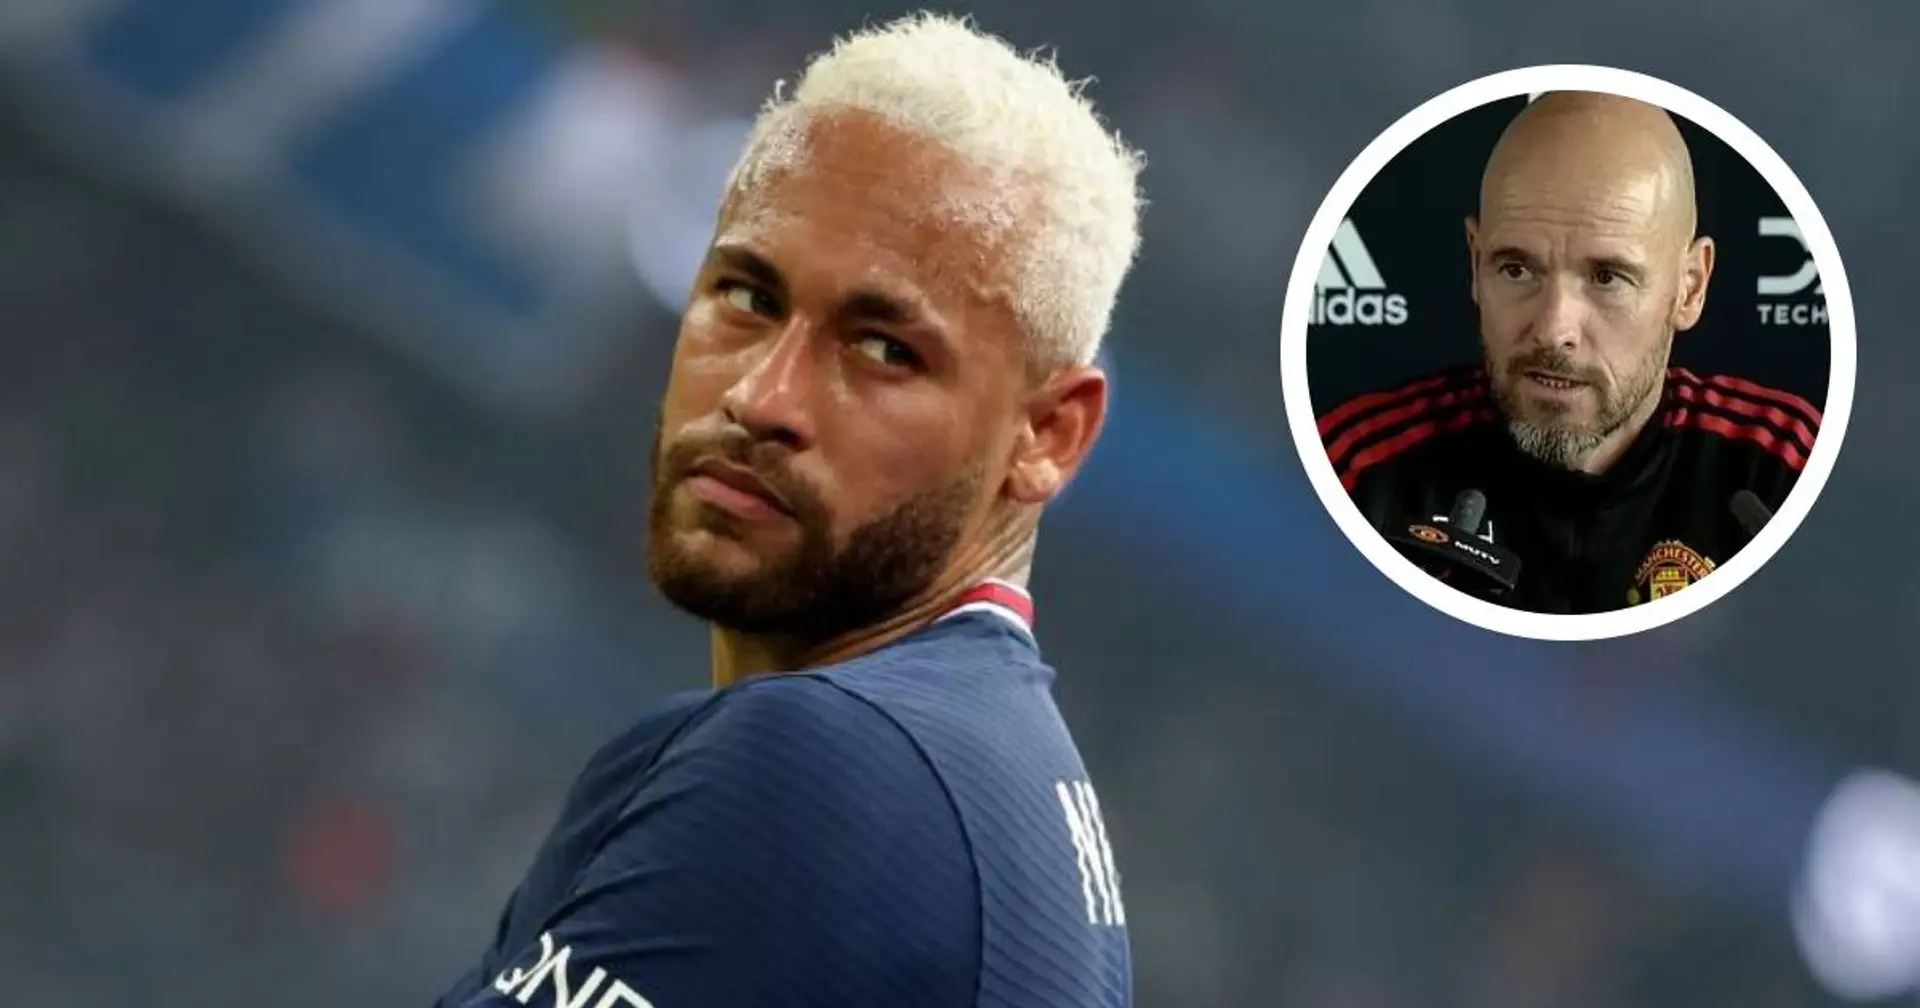 Ten Hag gives short and simple response when asked about signing Neymar